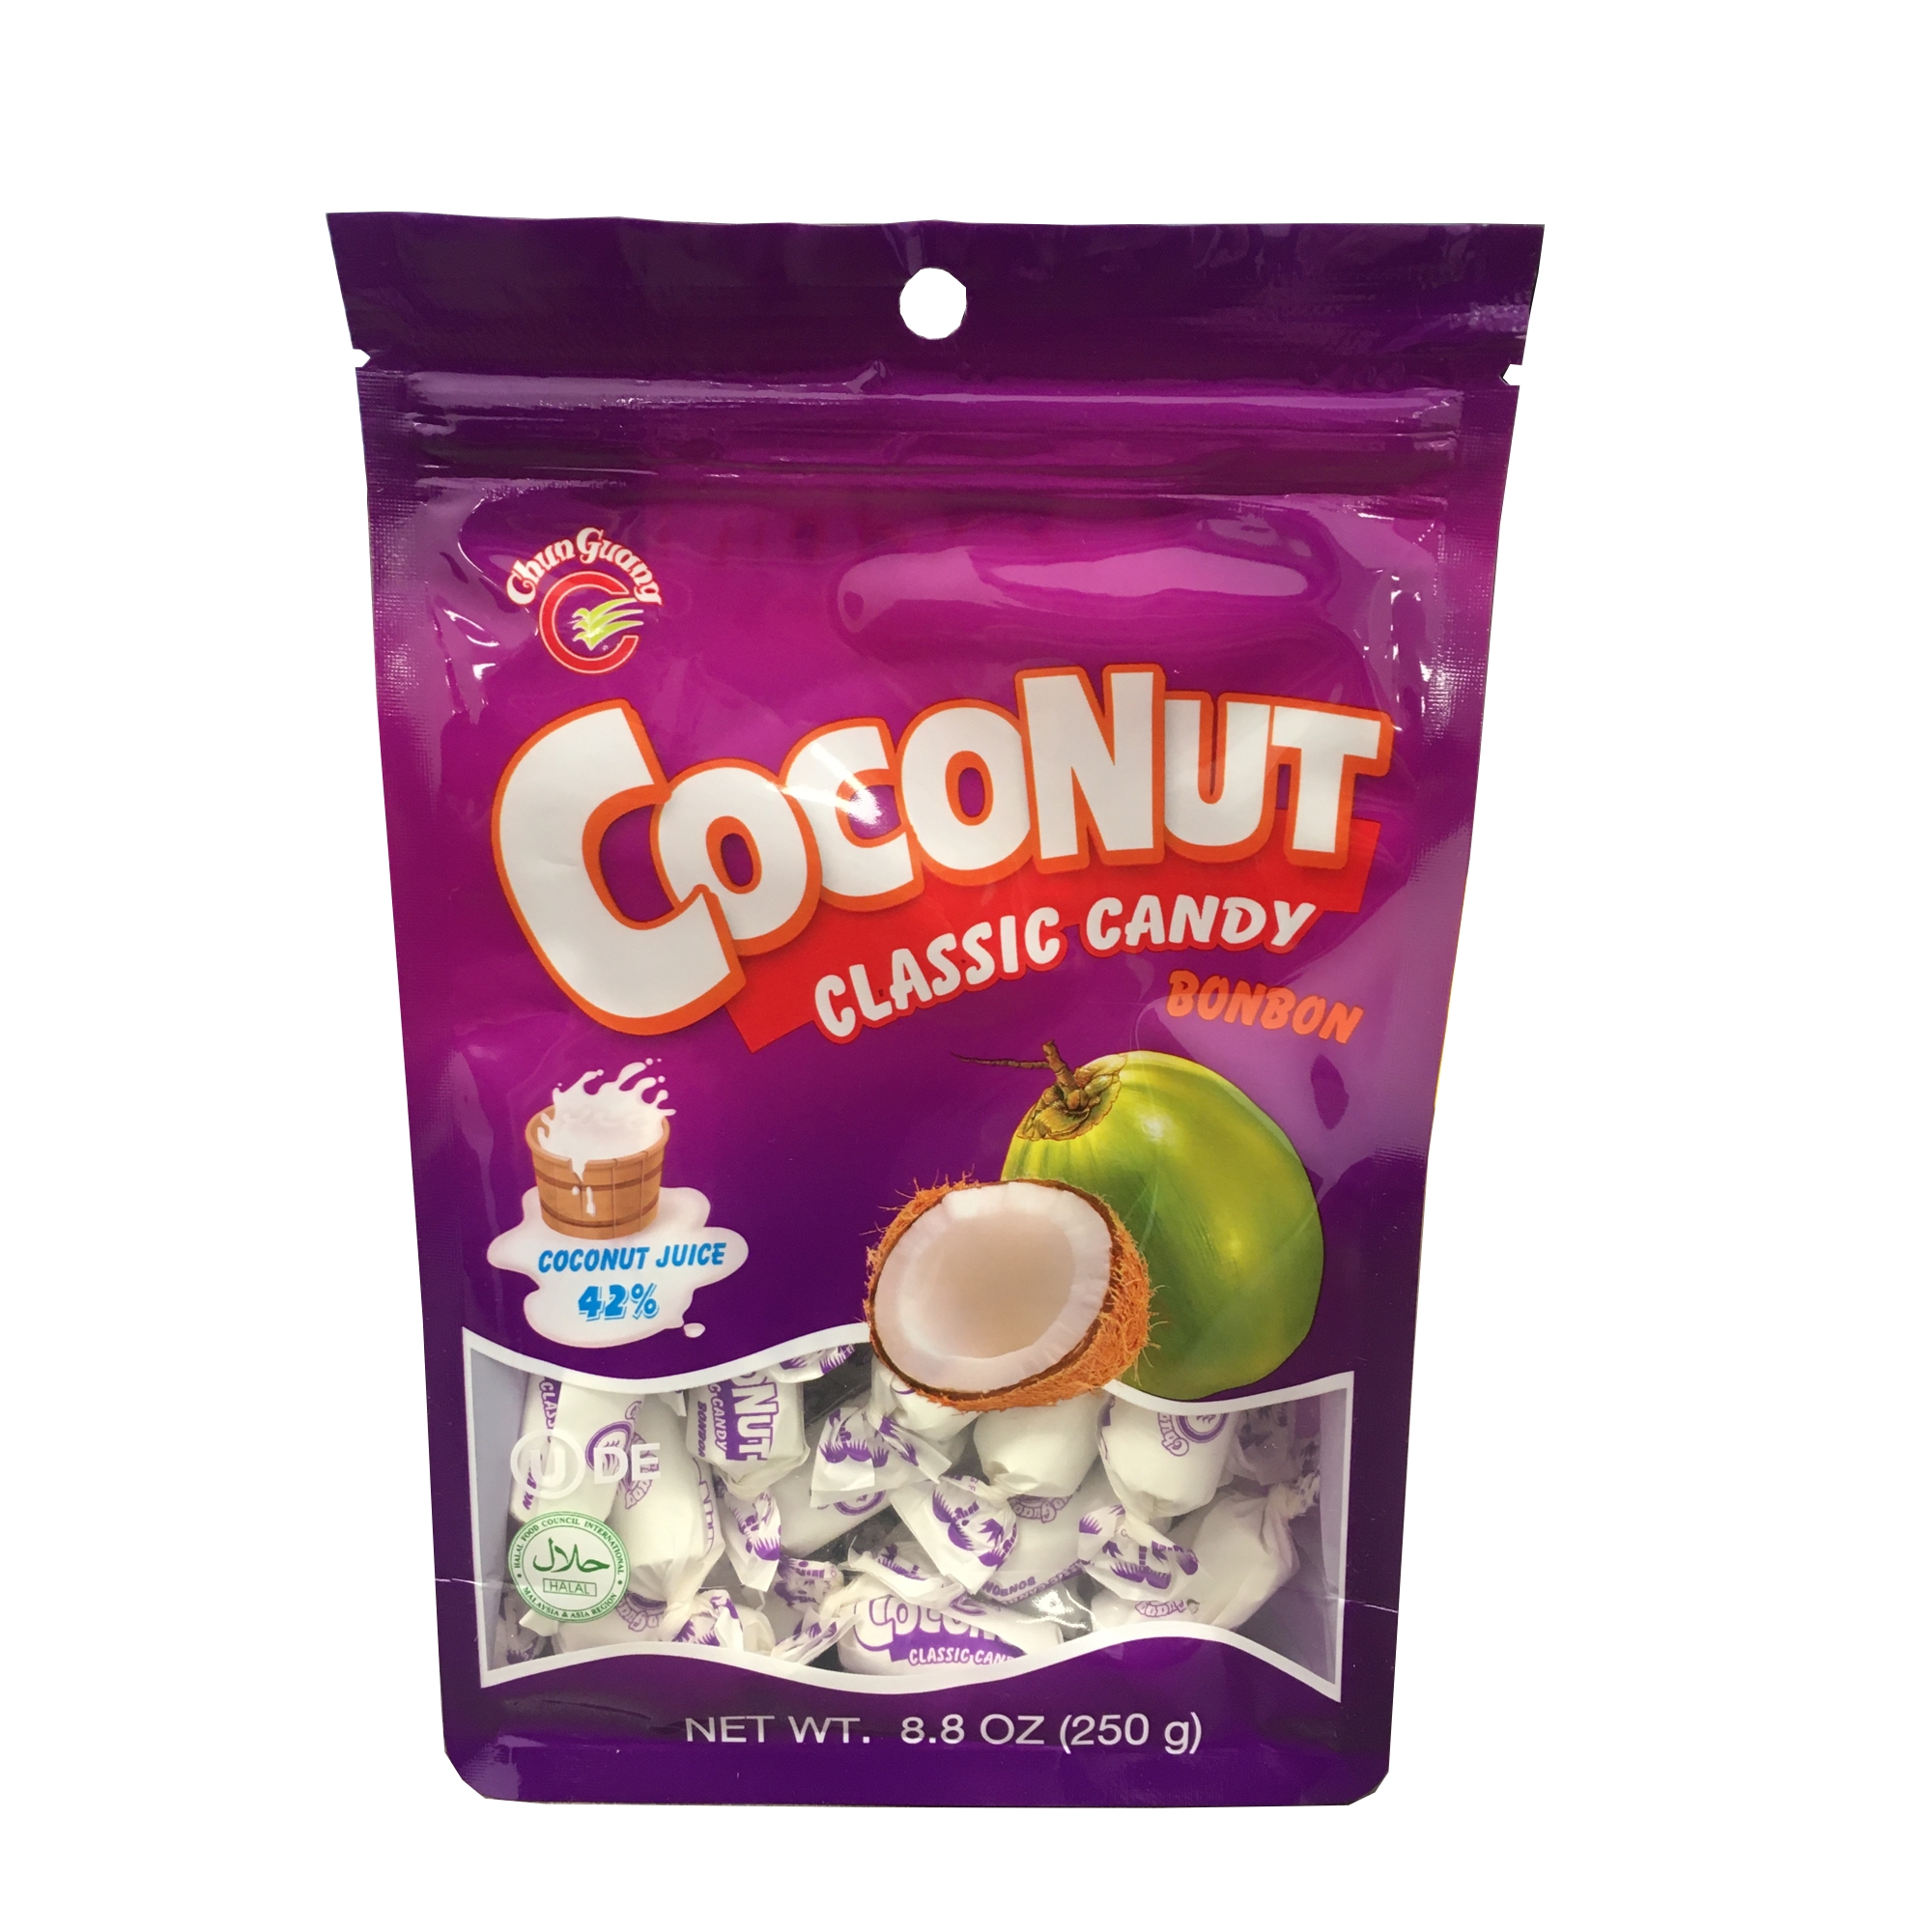 CG TRADITIONAL COCONUT CANDY SN130061